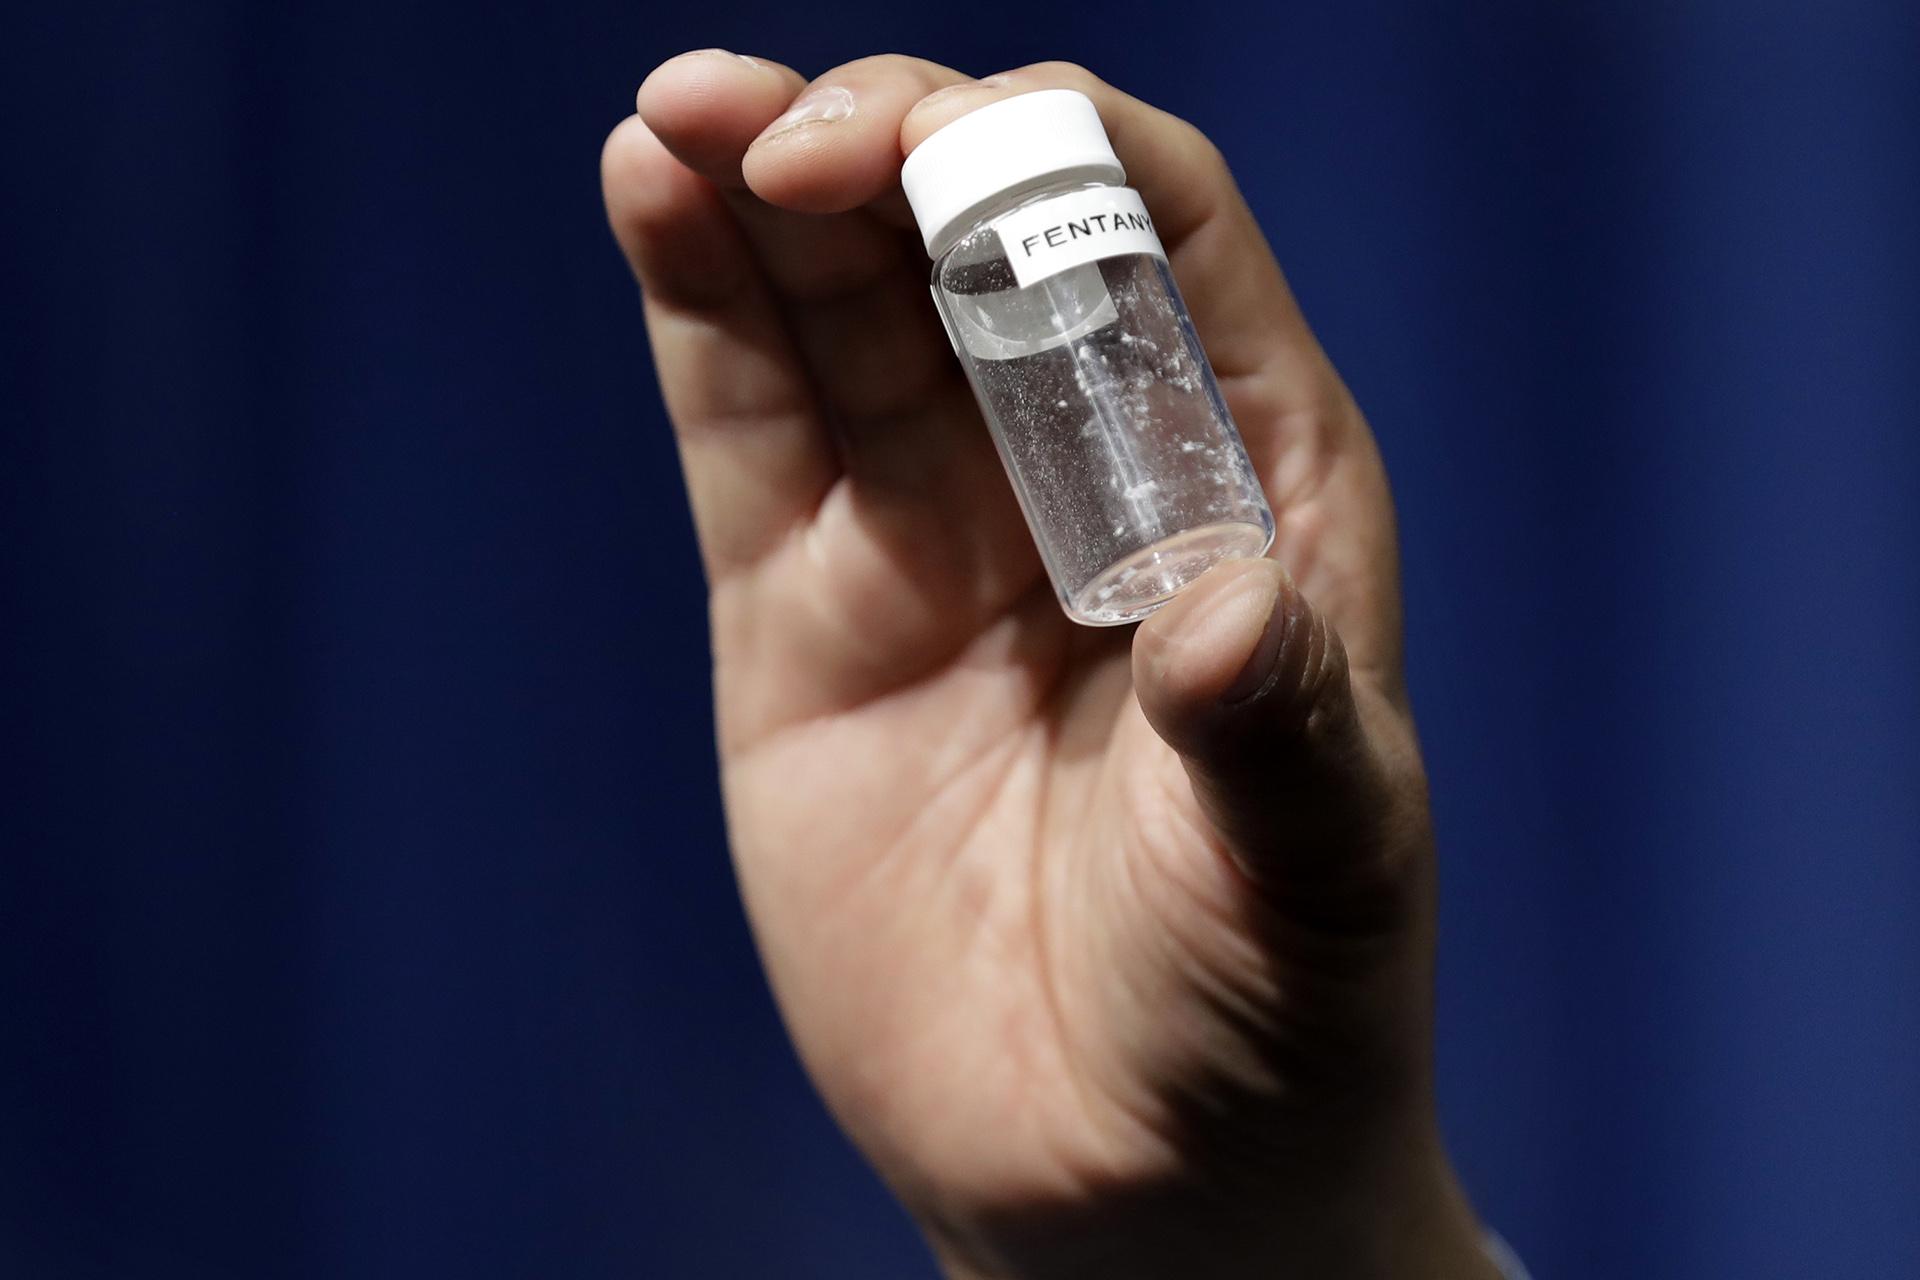 This June 6, 2017 file photo shows an example of the amount of fentanyl that can be deadly after a news conference about deaths from fentanyl exposure, at DEA Headquarters in Arlington, Virginia. (AP Photo / Jacquelyn Martin, File)